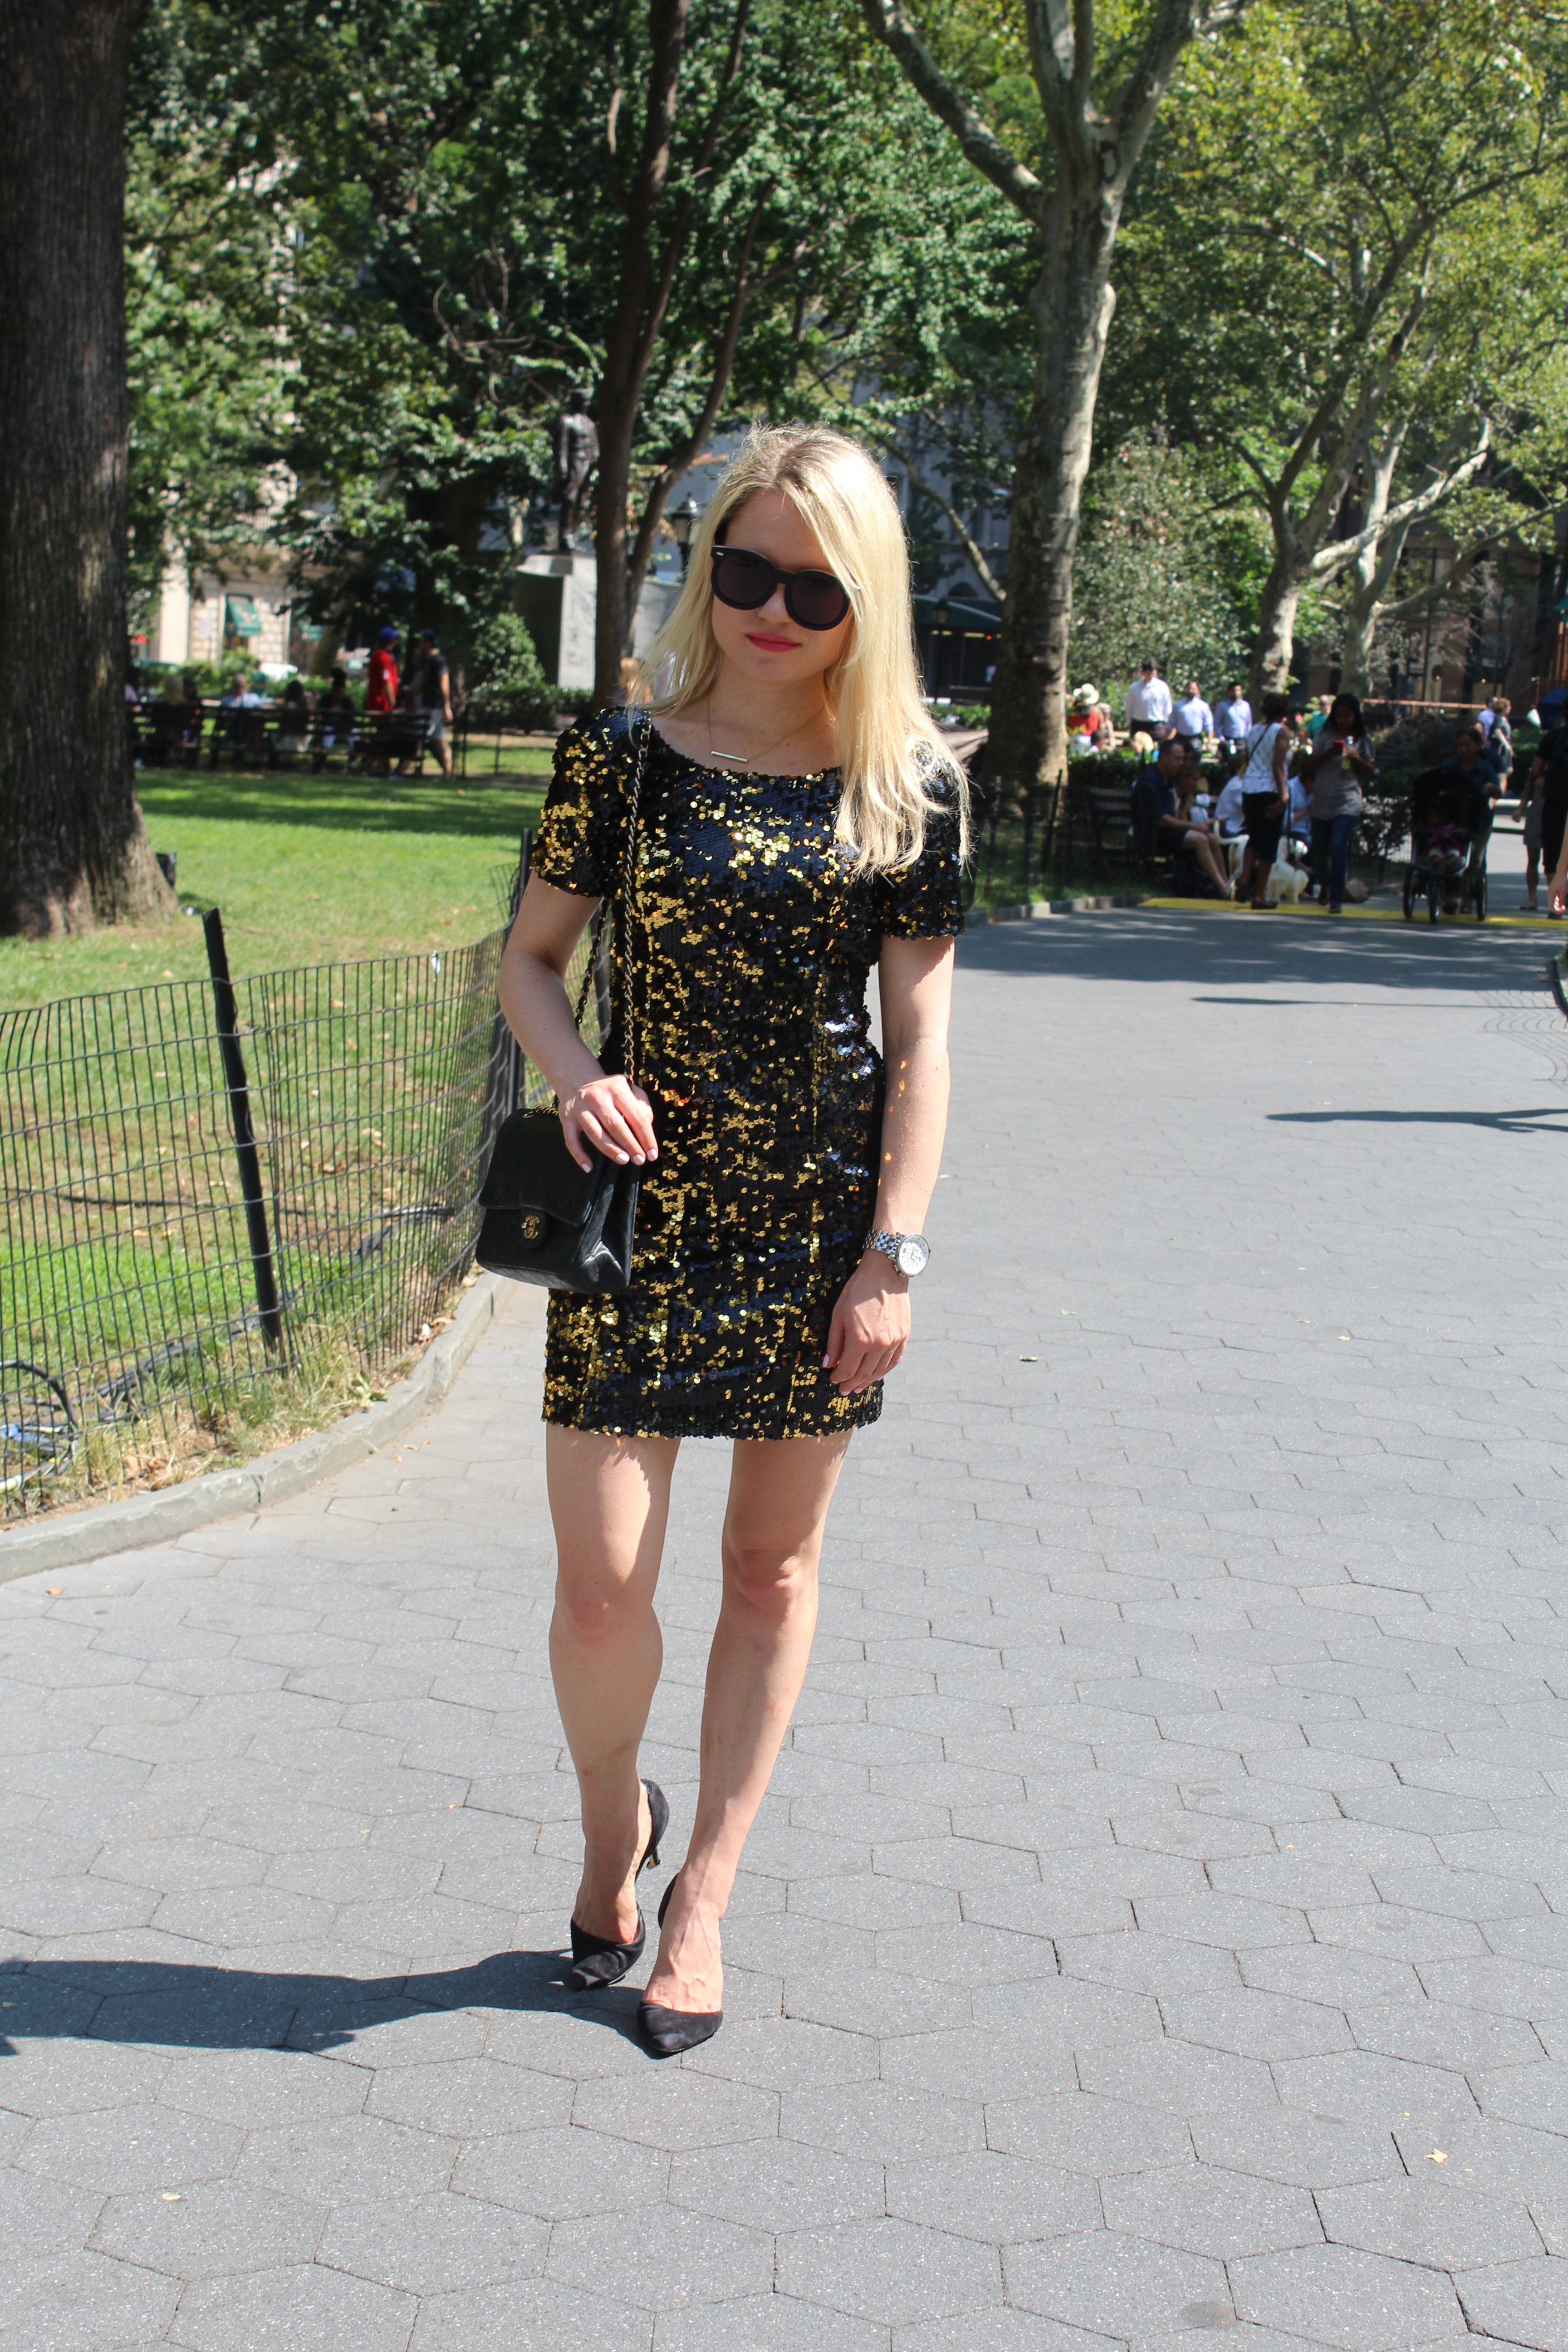 Caitlin Hartley of Styled American sheath sequin dress and chanel bag